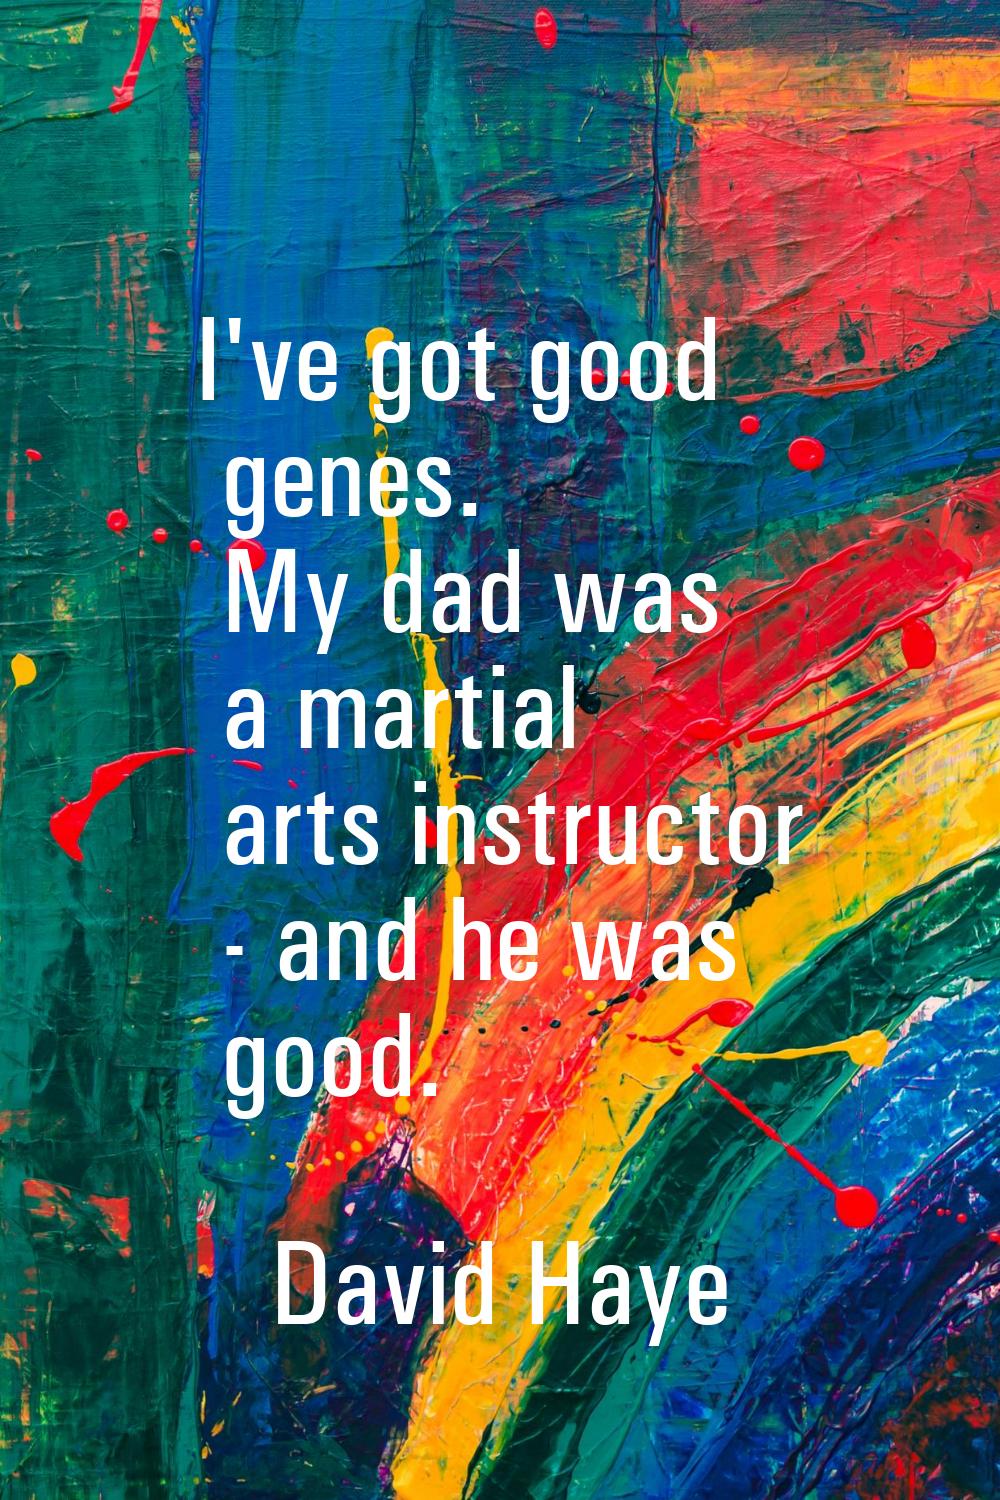 I've got good genes. My dad was a martial arts instructor - and he was good.